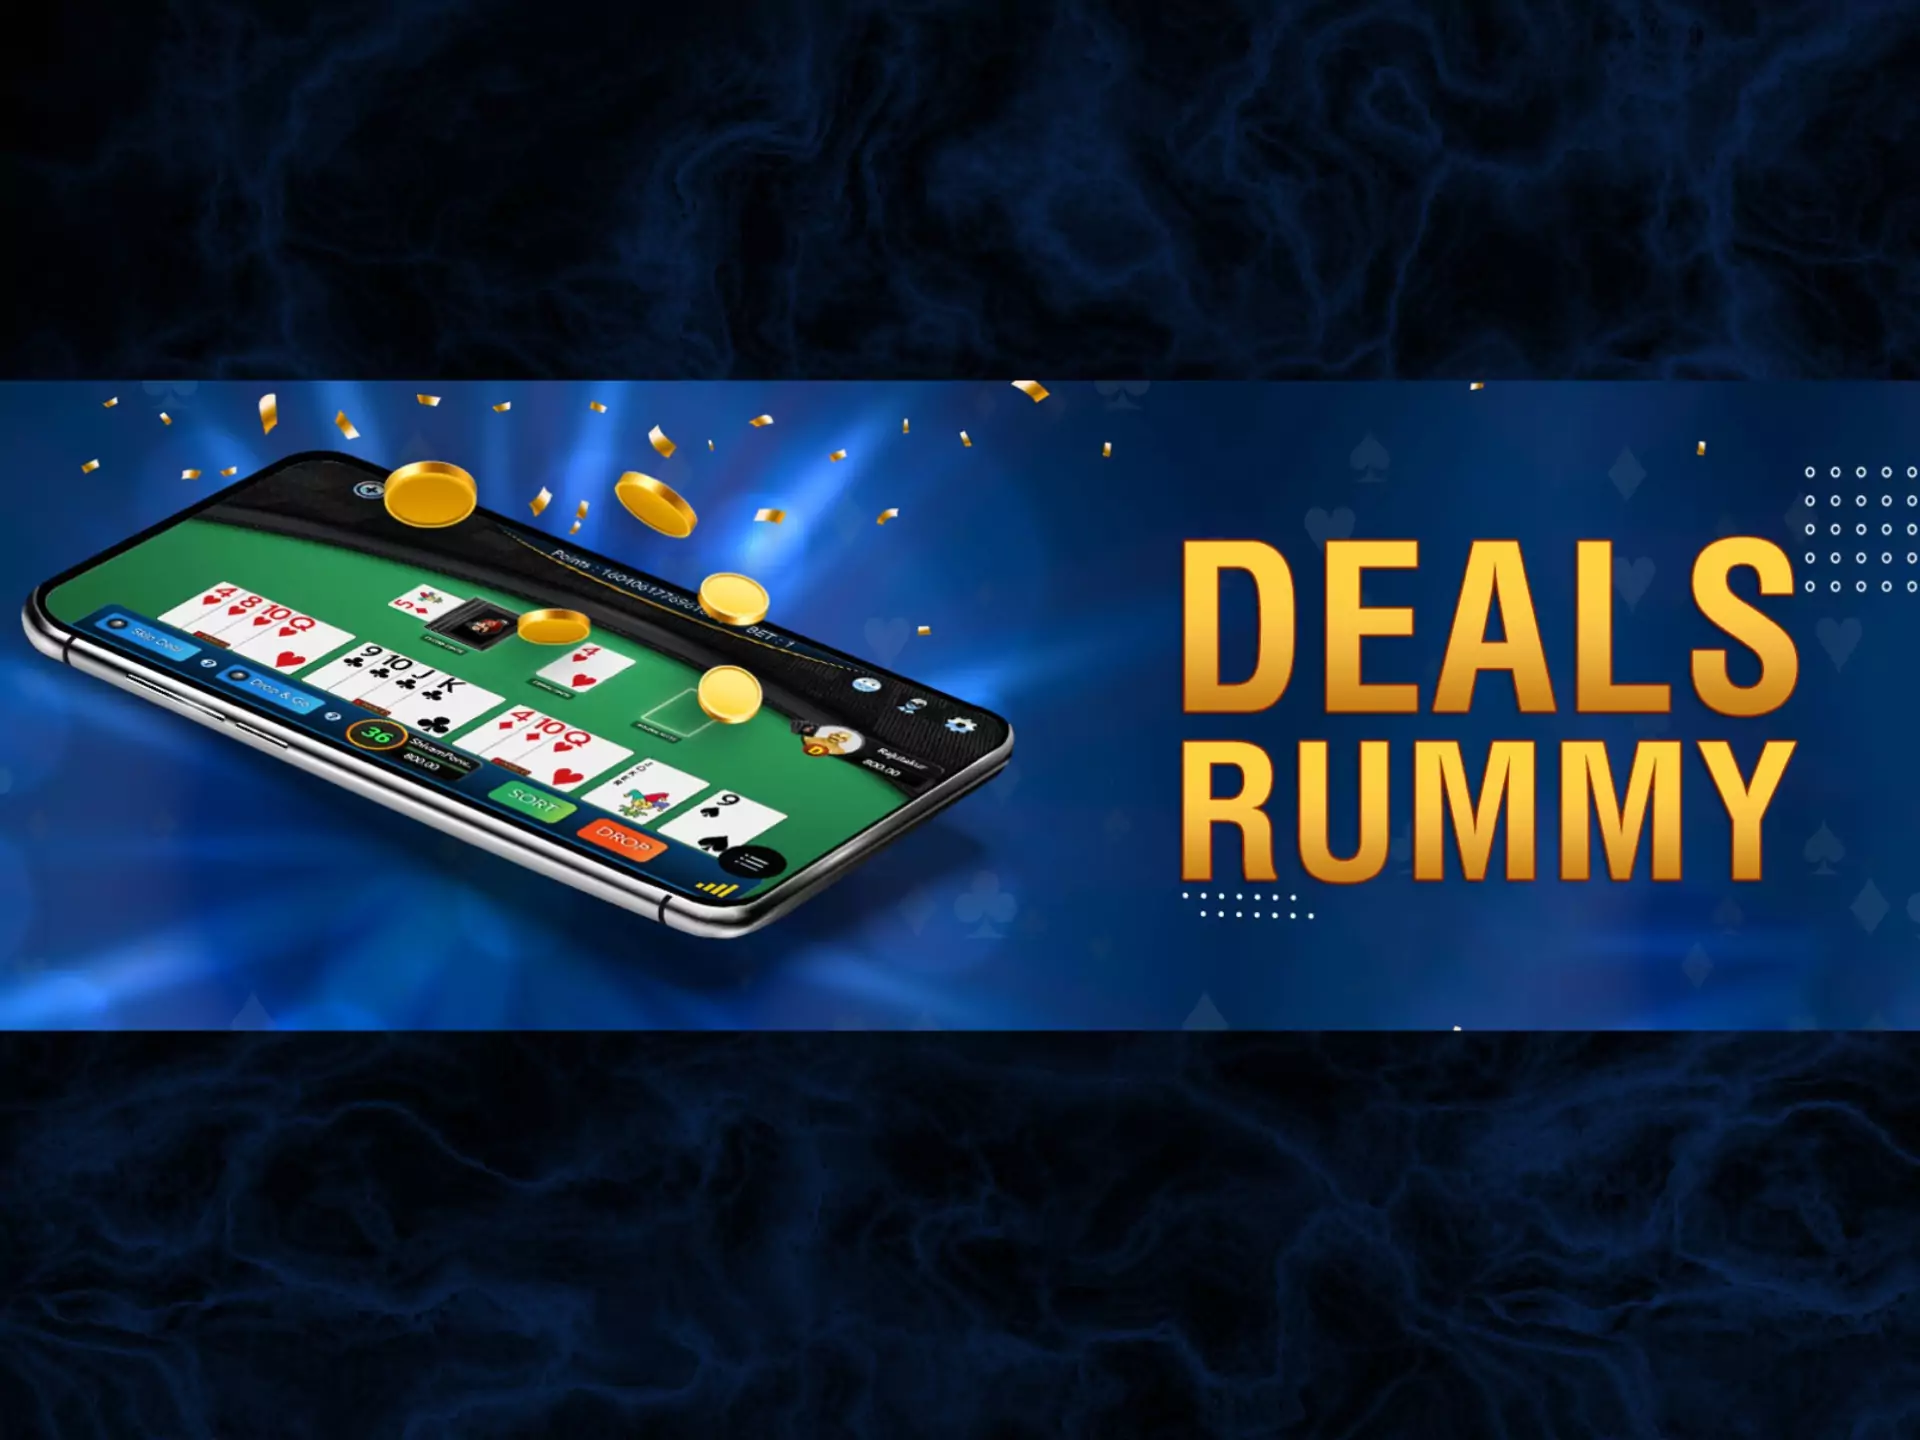 Play Deals Rummy if you want to have an exciting gambling time.